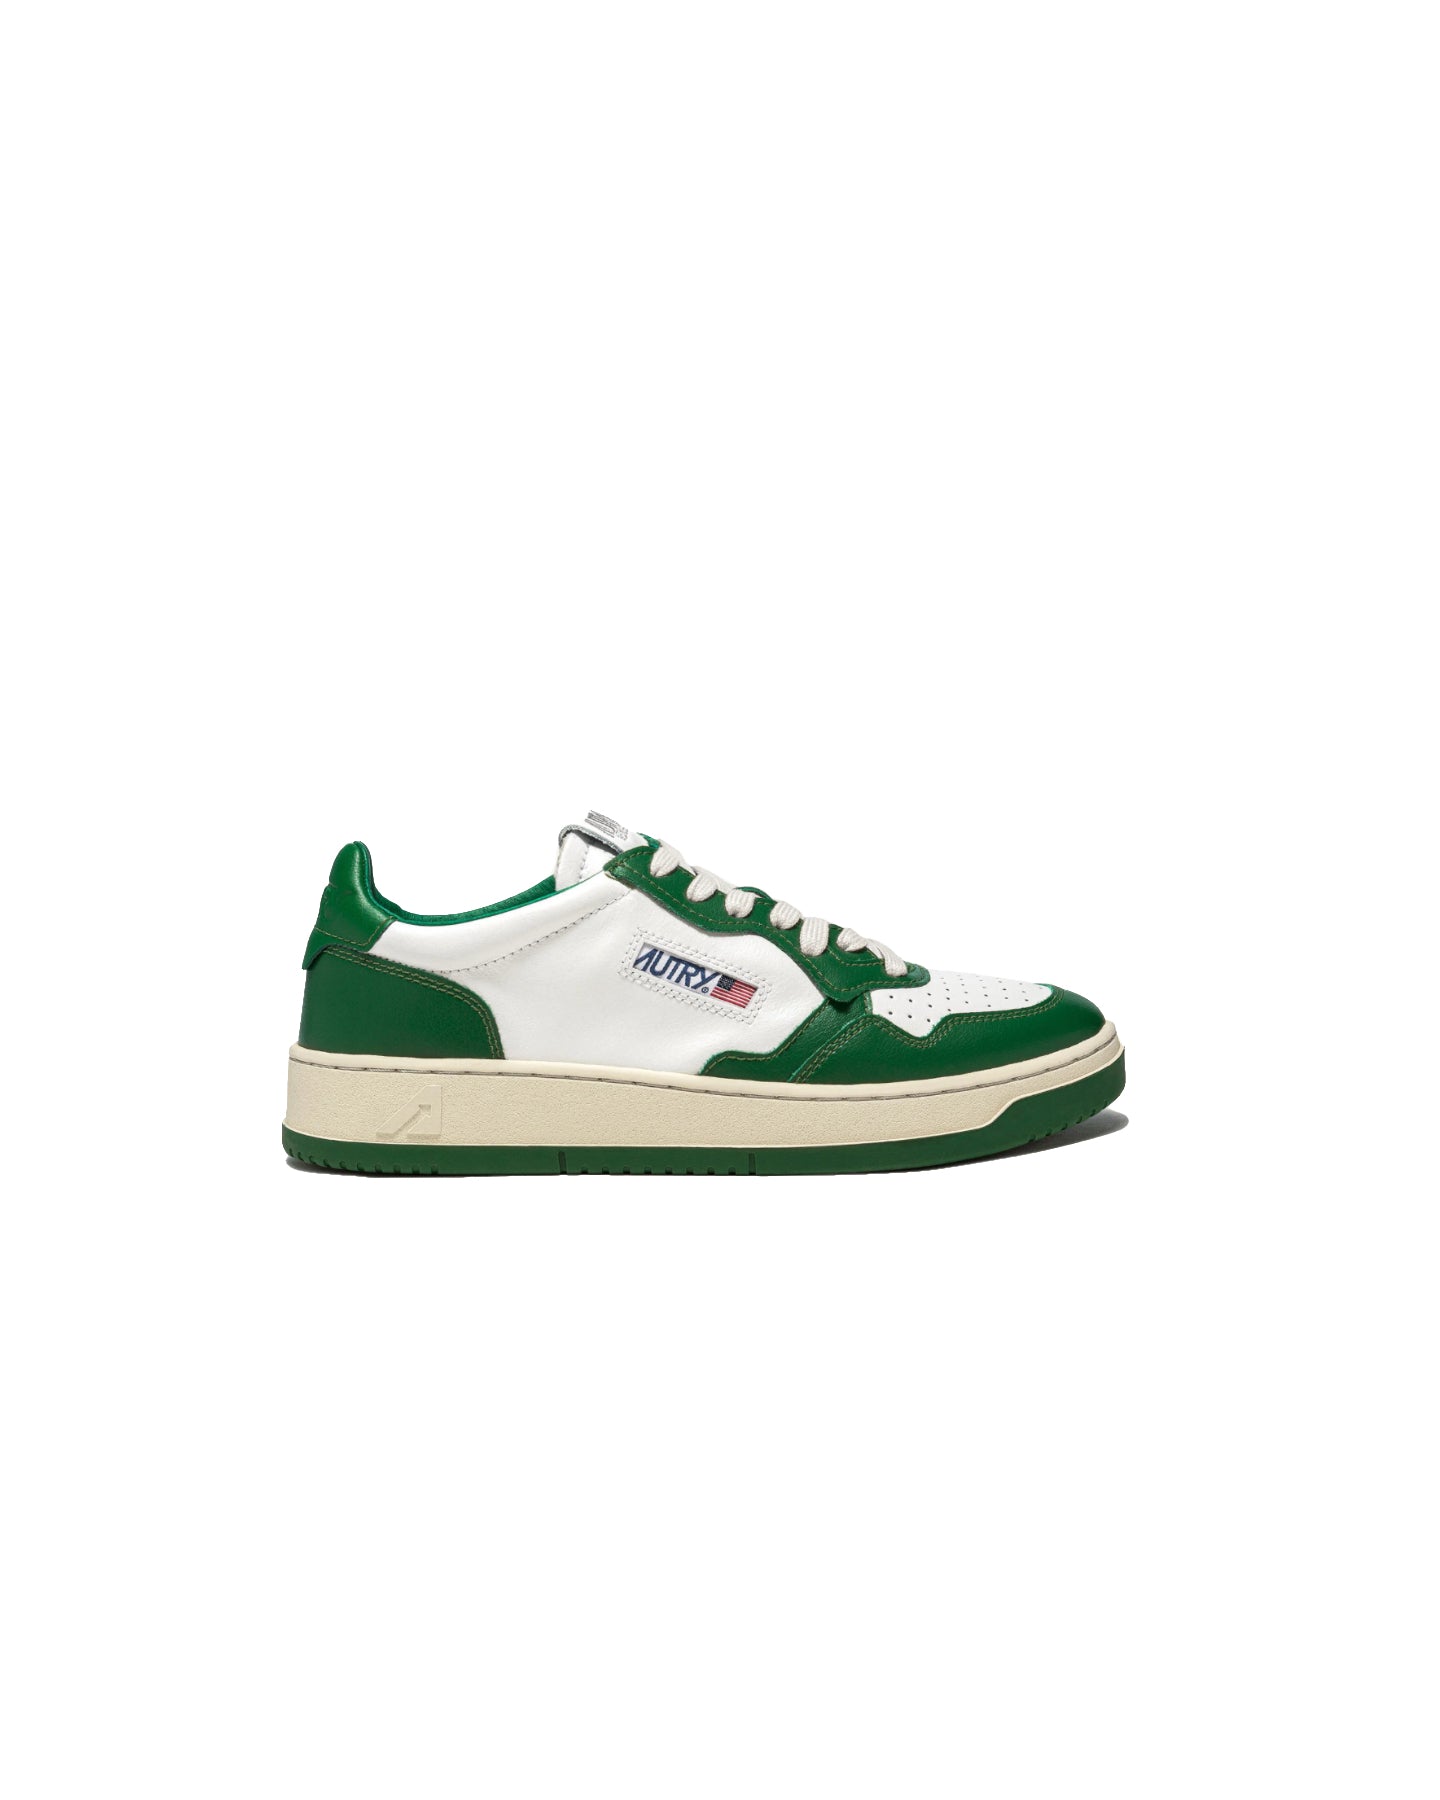 Autry Two-Tone Medalist WB03 Shoes - White/Green